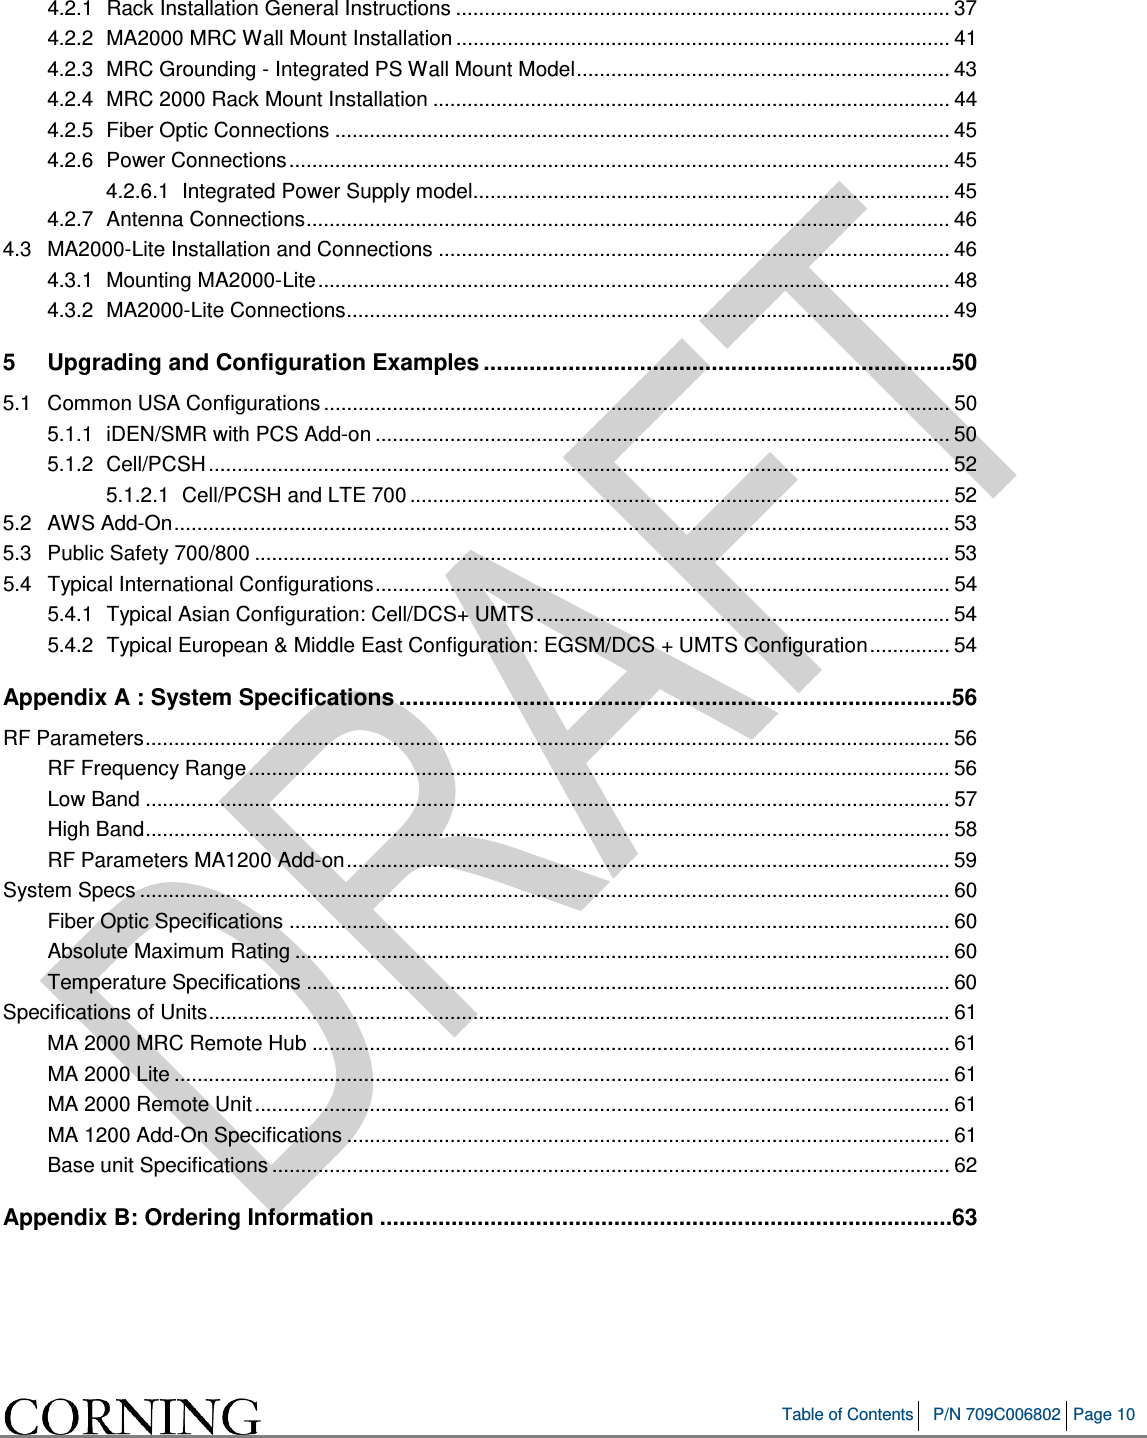   Table of Contents P/N 709C006802 Page 10   4.2.1 Rack Installation General Instructions ...................................................................................... 37 4.2.2 MA2000 MRC Wall Mount Installation ...................................................................................... 41 4.2.3 MRC Grounding - Integrated PS Wall Mount Model ................................................................. 43 4.2.4 MRC 2000 Rack Mount Installation .......................................................................................... 44 4.2.5 Fiber Optic Connections ........................................................................................................... 45 4.2.6 Power Connections ................................................................................................................... 45 4.2.6.1 Integrated Power Supply model................................................................................... 45 4.2.7 Antenna Connections ................................................................................................................ 46 4.3 MA2000-Lite Installation and Connections ......................................................................................... 46 4.3.1 Mounting MA2000-Lite .............................................................................................................. 48 4.3.2 MA2000-Lite Connections ......................................................................................................... 49 5 Upgrading and Configuration Examples ........................................................................ 50 5.1 Common USA Configurations ............................................................................................................. 50 5.1.1 iDEN/SMR with PCS Add-on .................................................................................................... 50 5.1.2 Cell/PCSH ................................................................................................................................. 52 5.1.2.1 Cell/PCSH and LTE 700 .............................................................................................. 52 5.2 AWS Add-On ....................................................................................................................................... 53 5.3 Public Safety 700/800 ......................................................................................................................... 53 5.4 Typical International Configurations .................................................................................................... 54 5.4.1 Typical Asian Configuration: Cell/DCS+ UMTS ........................................................................ 54 5.4.2 Typical European &amp; Middle East Configuration: EGSM/DCS + UMTS Configuration .............. 54 Appendix A : System Specifications ..................................................................................... 56 RF Parameters ............................................................................................................................................ 56 RF Frequency Range .......................................................................................................................... 56 Low Band ............................................................................................................................................ 57 High Band ............................................................................................................................................ 58 RF Parameters MA1200 Add-on ......................................................................................................... 59 System Specs ............................................................................................................................................. 60 Fiber Optic Specifications ................................................................................................................... 60 Absolute Maximum Rating .................................................................................................................. 60 Temperature Specifications ................................................................................................................ 60 Specifications of Units ................................................................................................................................. 61 MA 2000 MRC Remote Hub ............................................................................................................... 61 MA 2000 Lite ....................................................................................................................................... 61 MA 2000 Remote Unit ......................................................................................................................... 61 MA 1200 Add-On Specifications ......................................................................................................... 61 Base unit Specifications ...................................................................................................................... 62 Appendix B: Ordering Information ........................................................................................ 63    